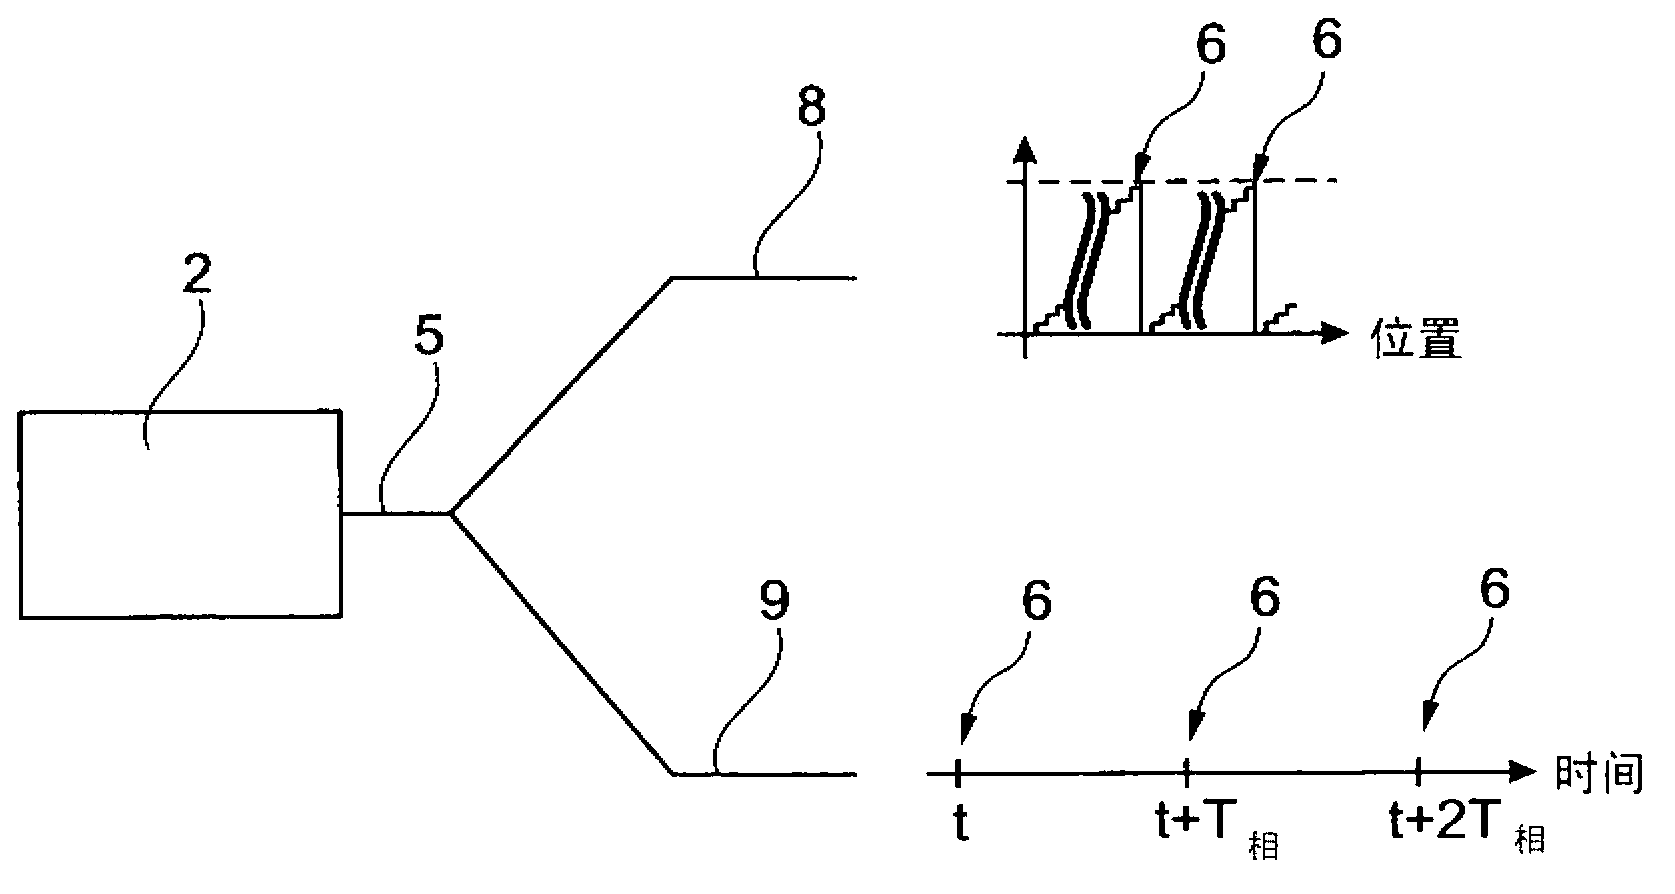 Method for adjusting the rotor position of an electrically commutated motor